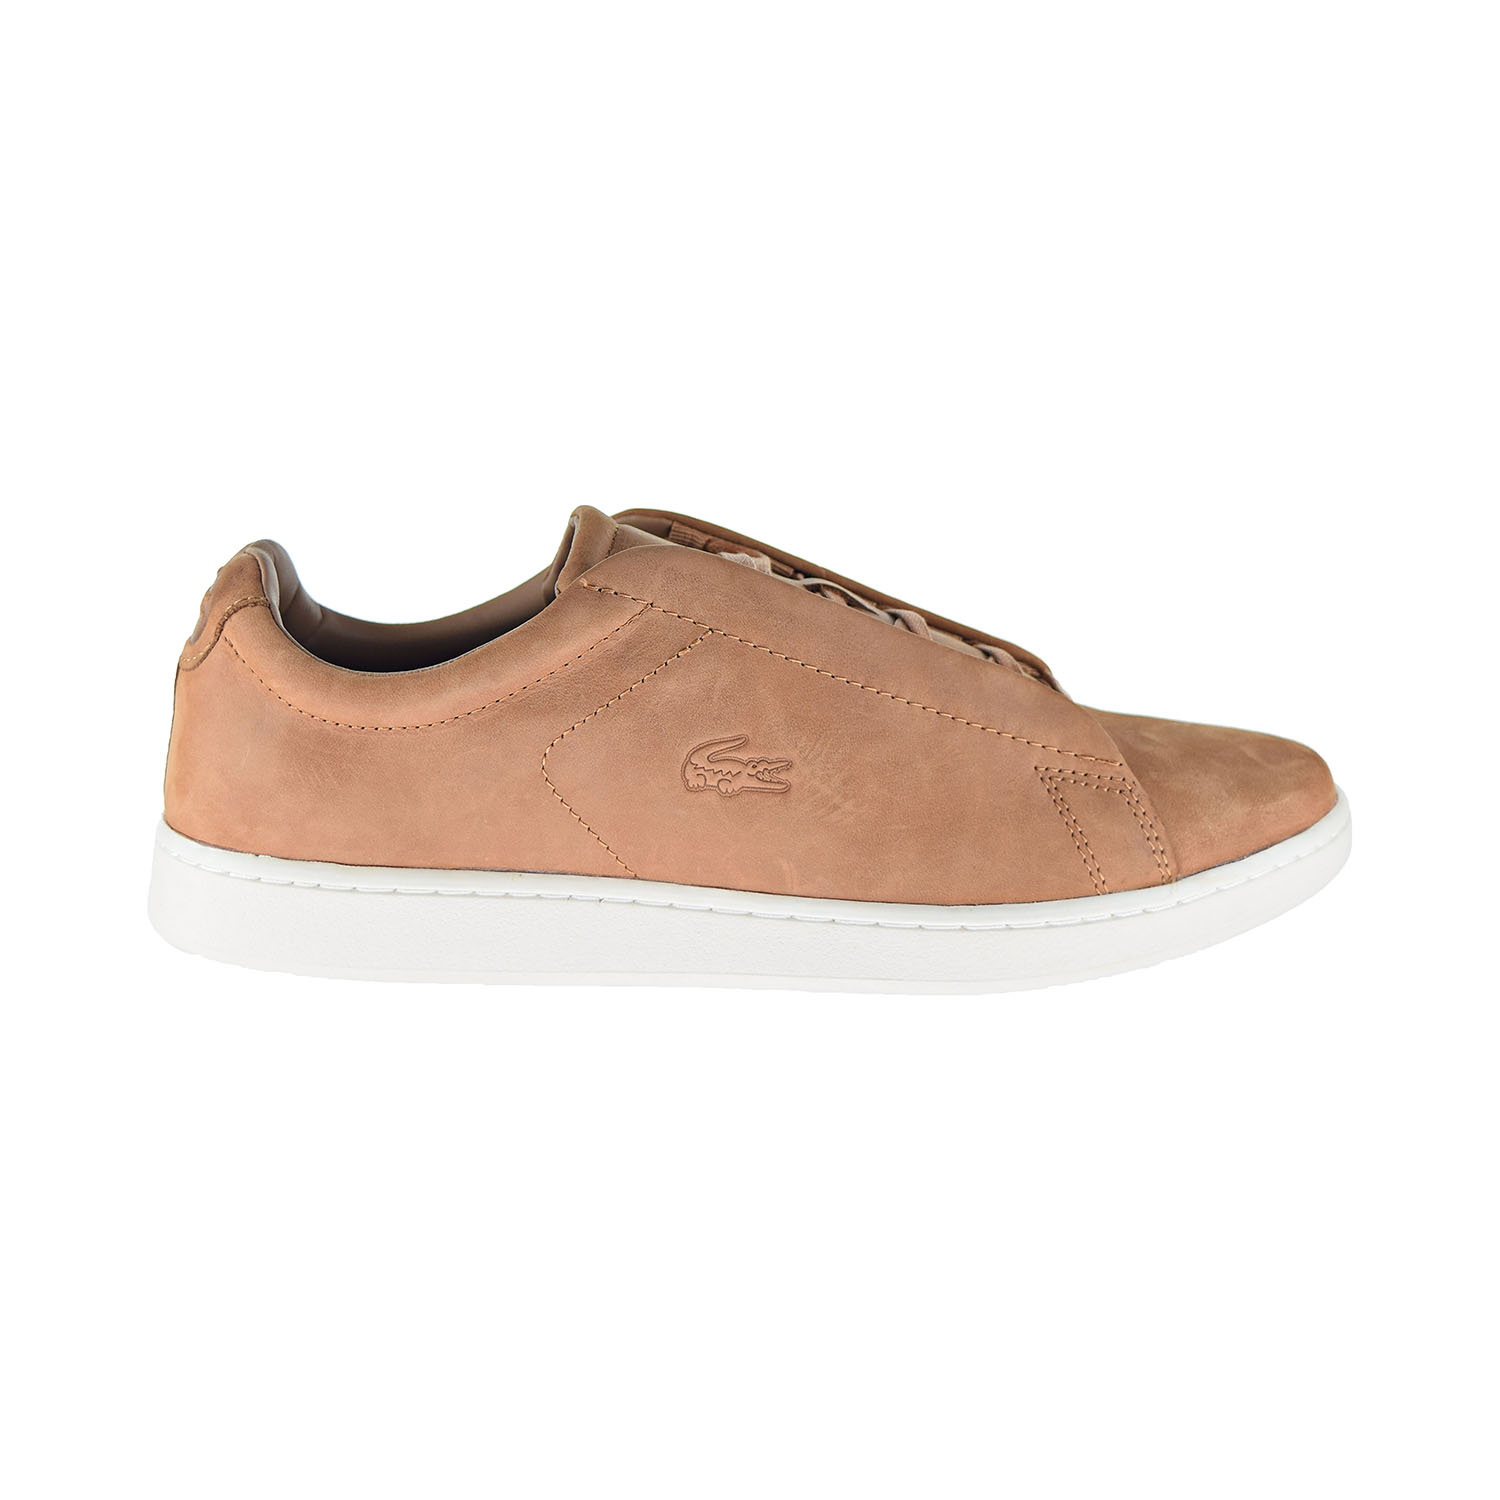 Lacoste Carnaby Evo Easy 319 1 SMA Men's Shoes Brown/Off White 7-38sma0015-2c3 - image 1 of 6